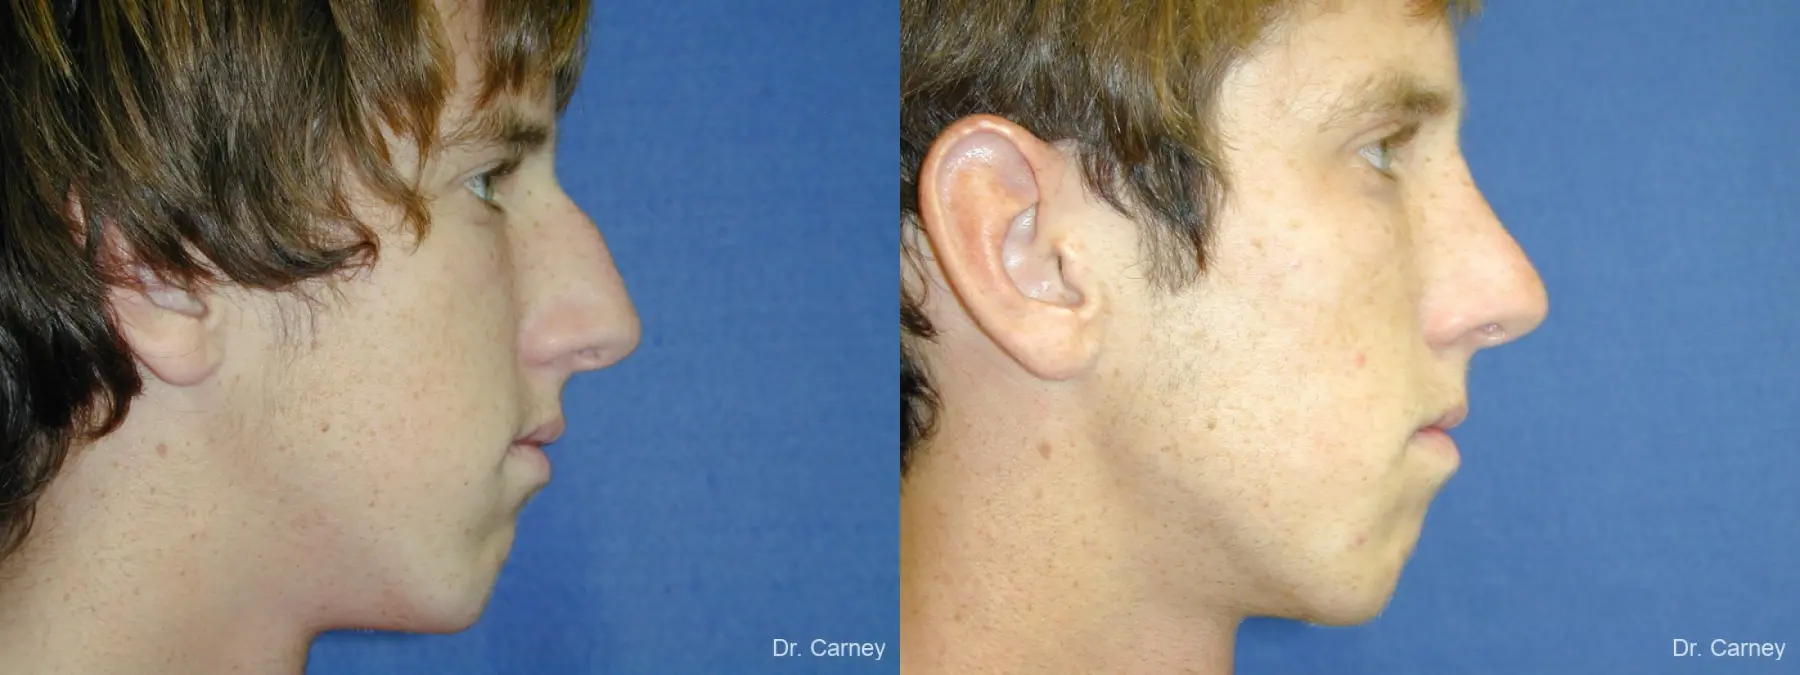 Virginia Beach Rhinoplasty 1219 - Before and After 1